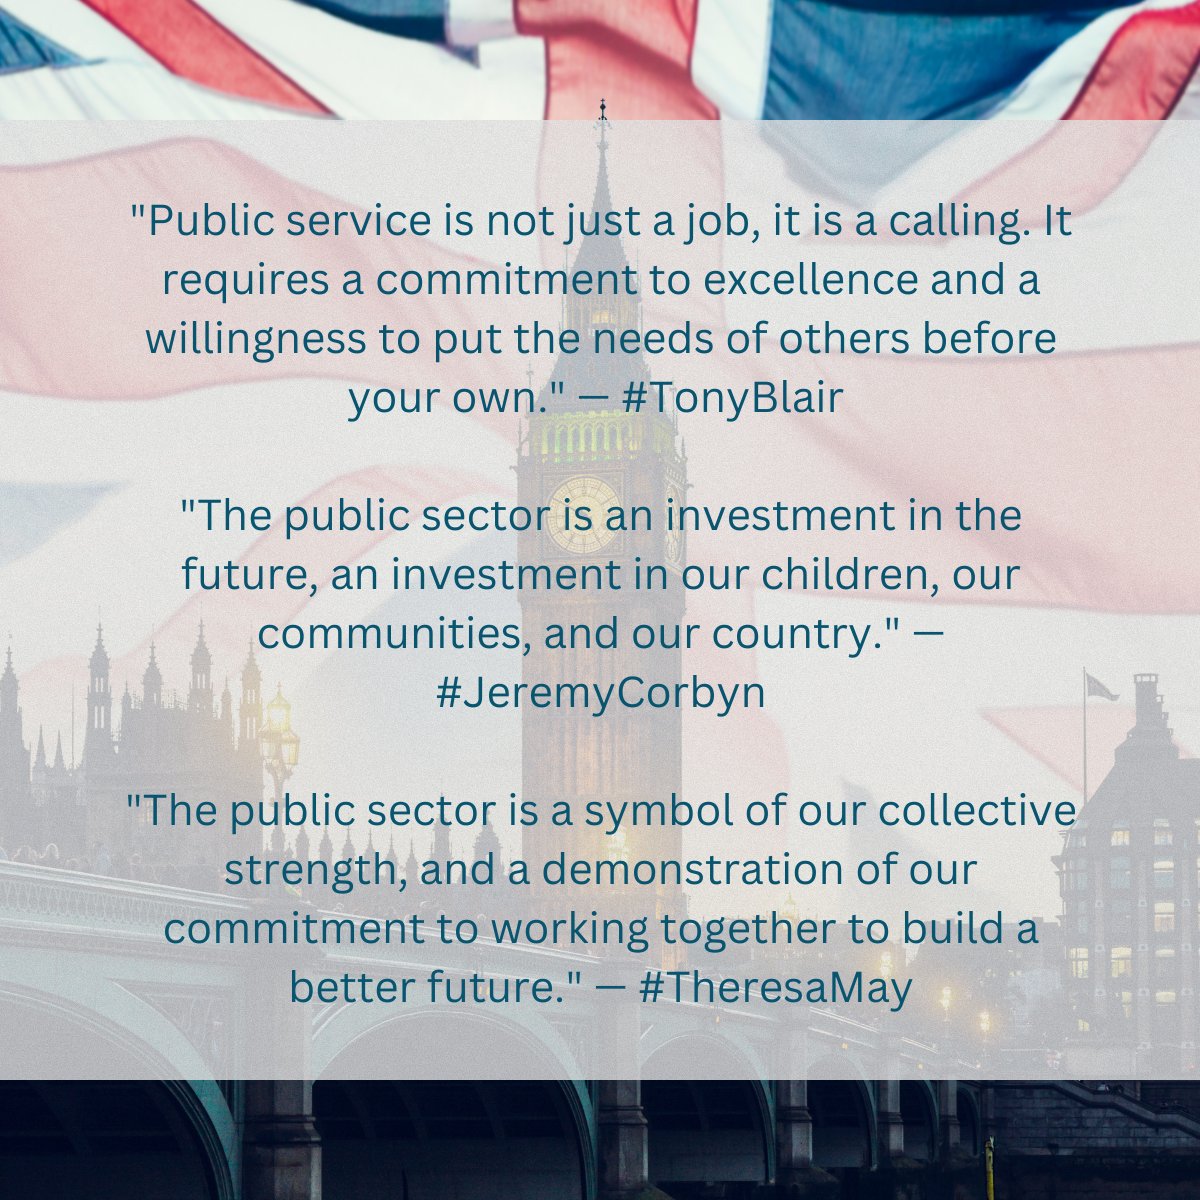 #InterestingQuotes
This is what x3 UK politicians said about the UK Public Sector.

See about our public sector clients: augmentasgroup.com/clients/
#ProudToServe #UKPublicSector #InspiringWords #CentralGovernment #ProcurementExpertise #TonyBlair #JeremyCorbyn #TheresaMay